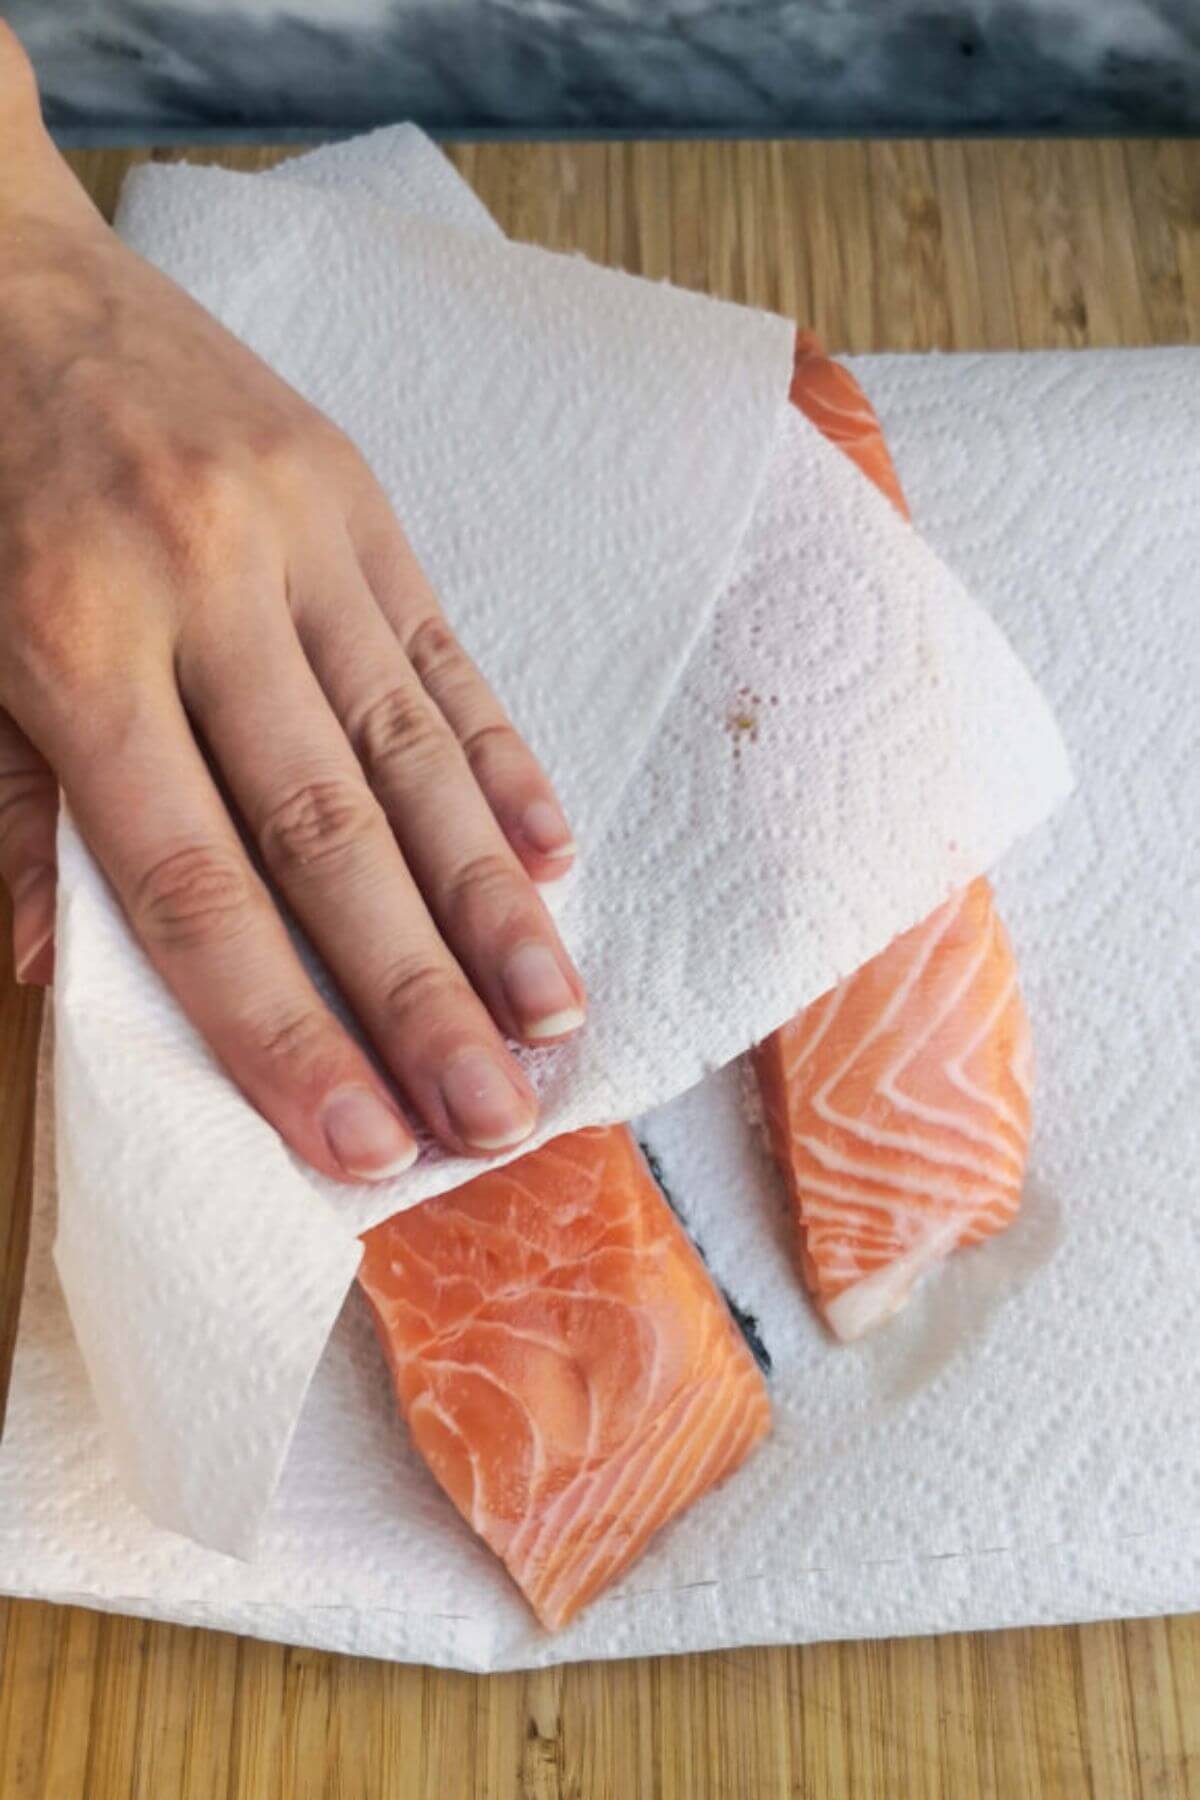 Hands and a paper towel patting dry two salmon fillets on a wooden board.